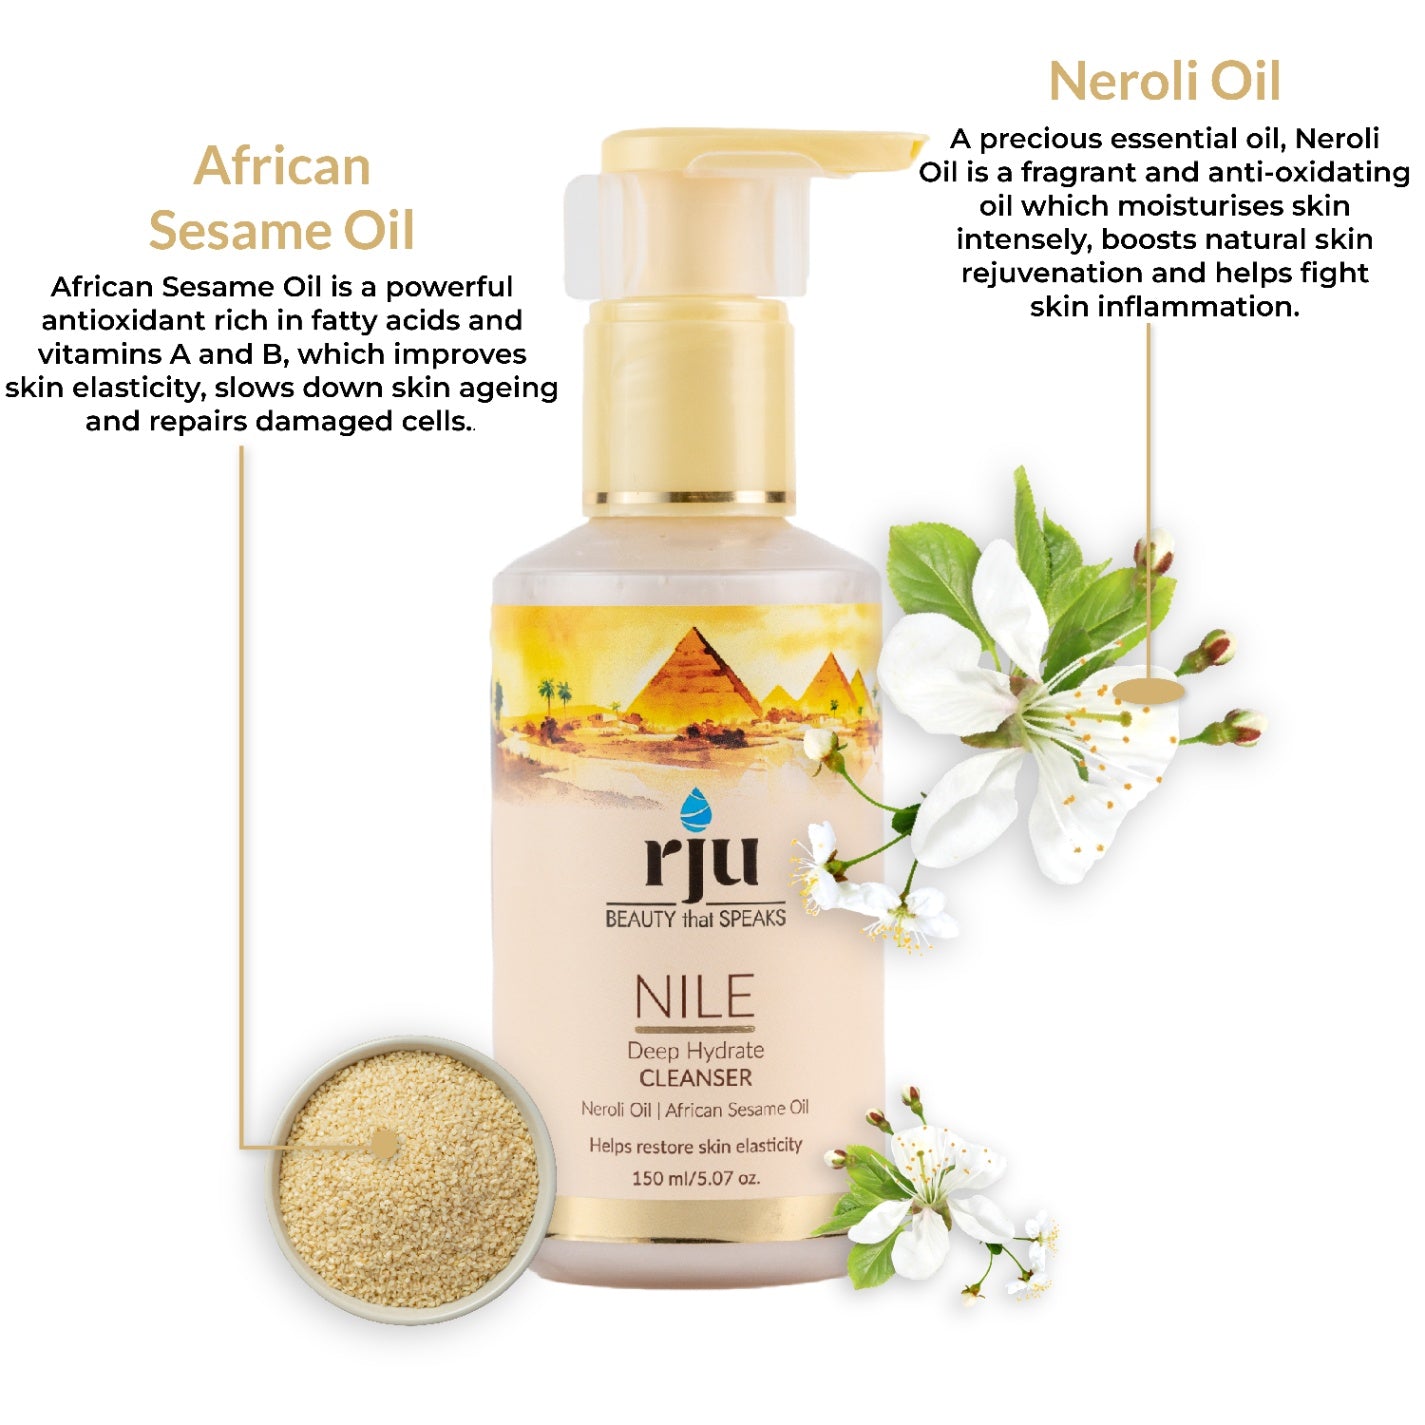 Nile Deep Hydrate Cleanser